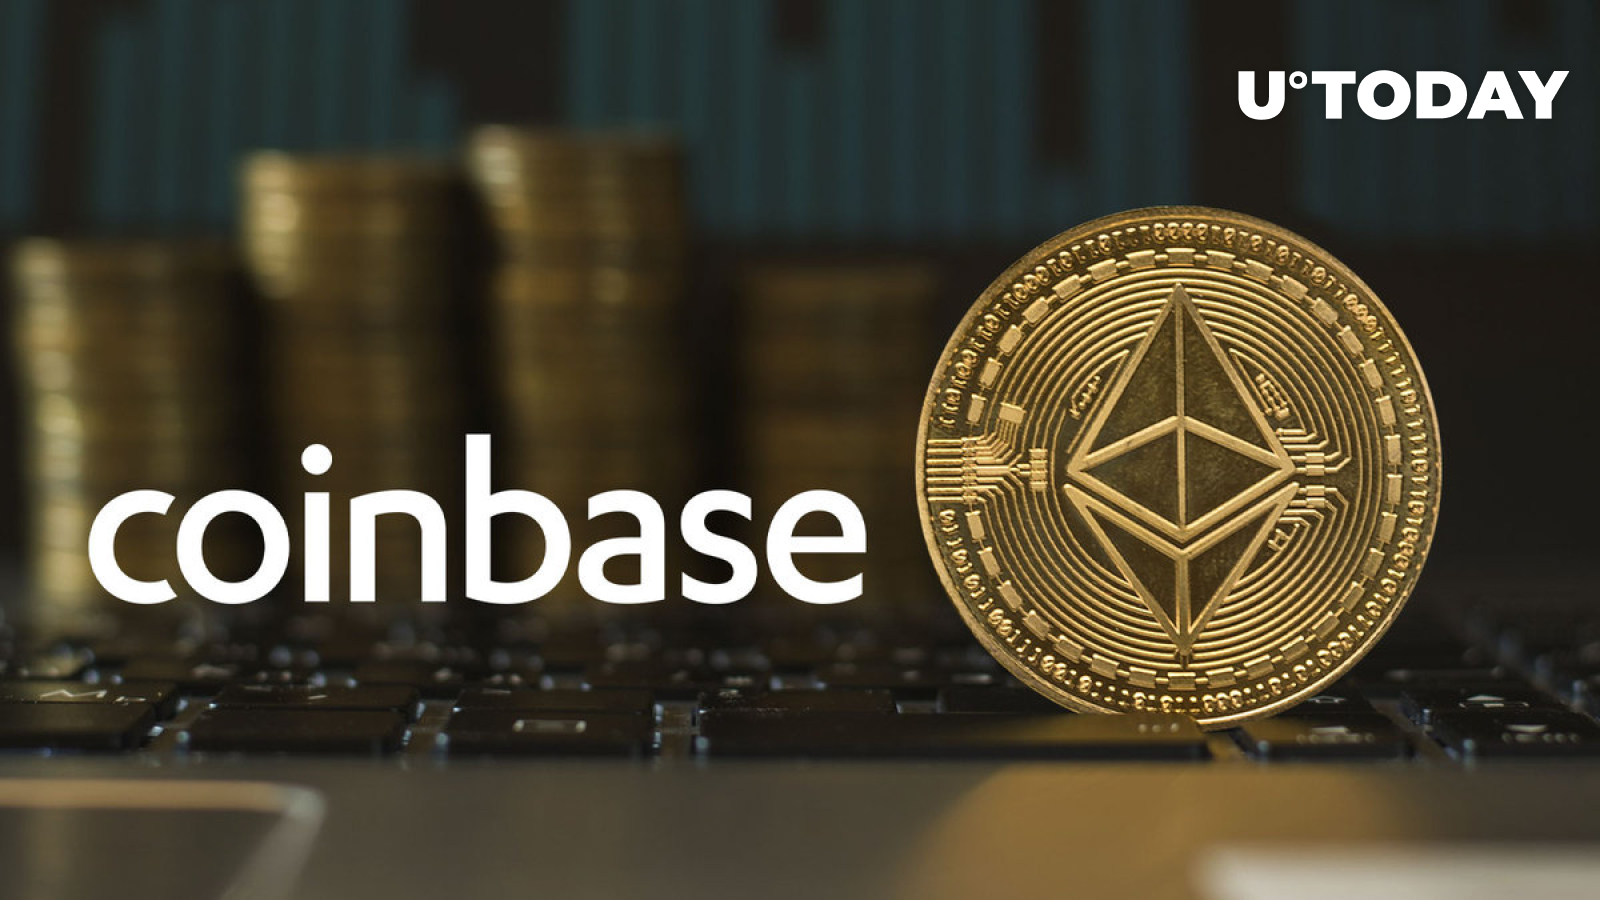 Coinbase Lawyer: Ethereum (ETH) Is Commodity